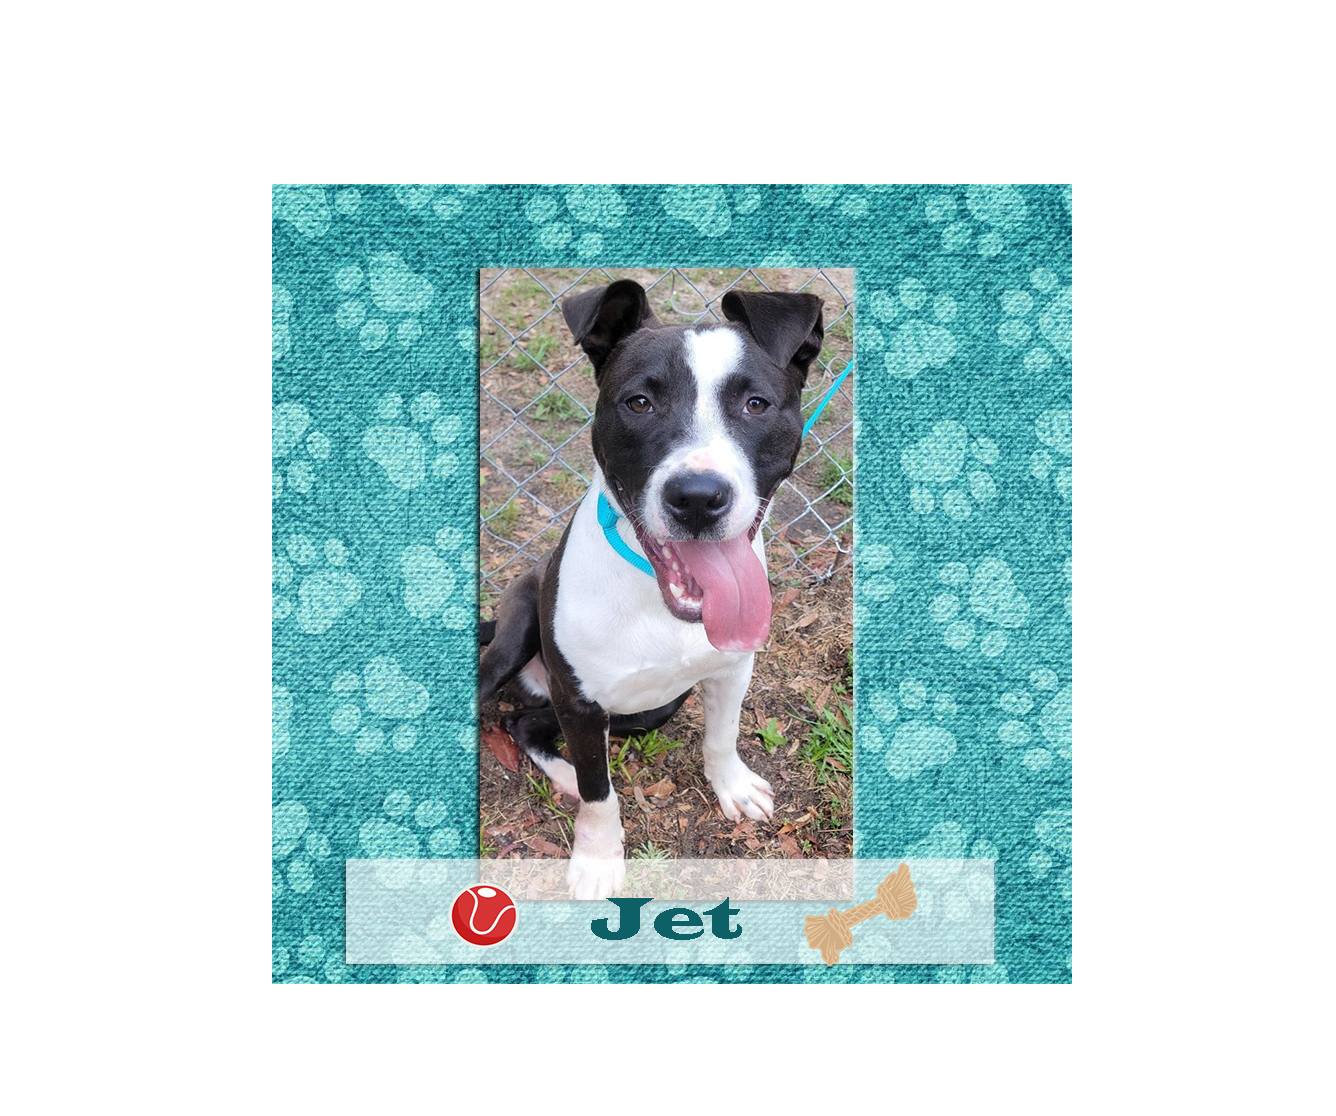 statesboro bulloch animal shelter jet for adoption july 2021 featured